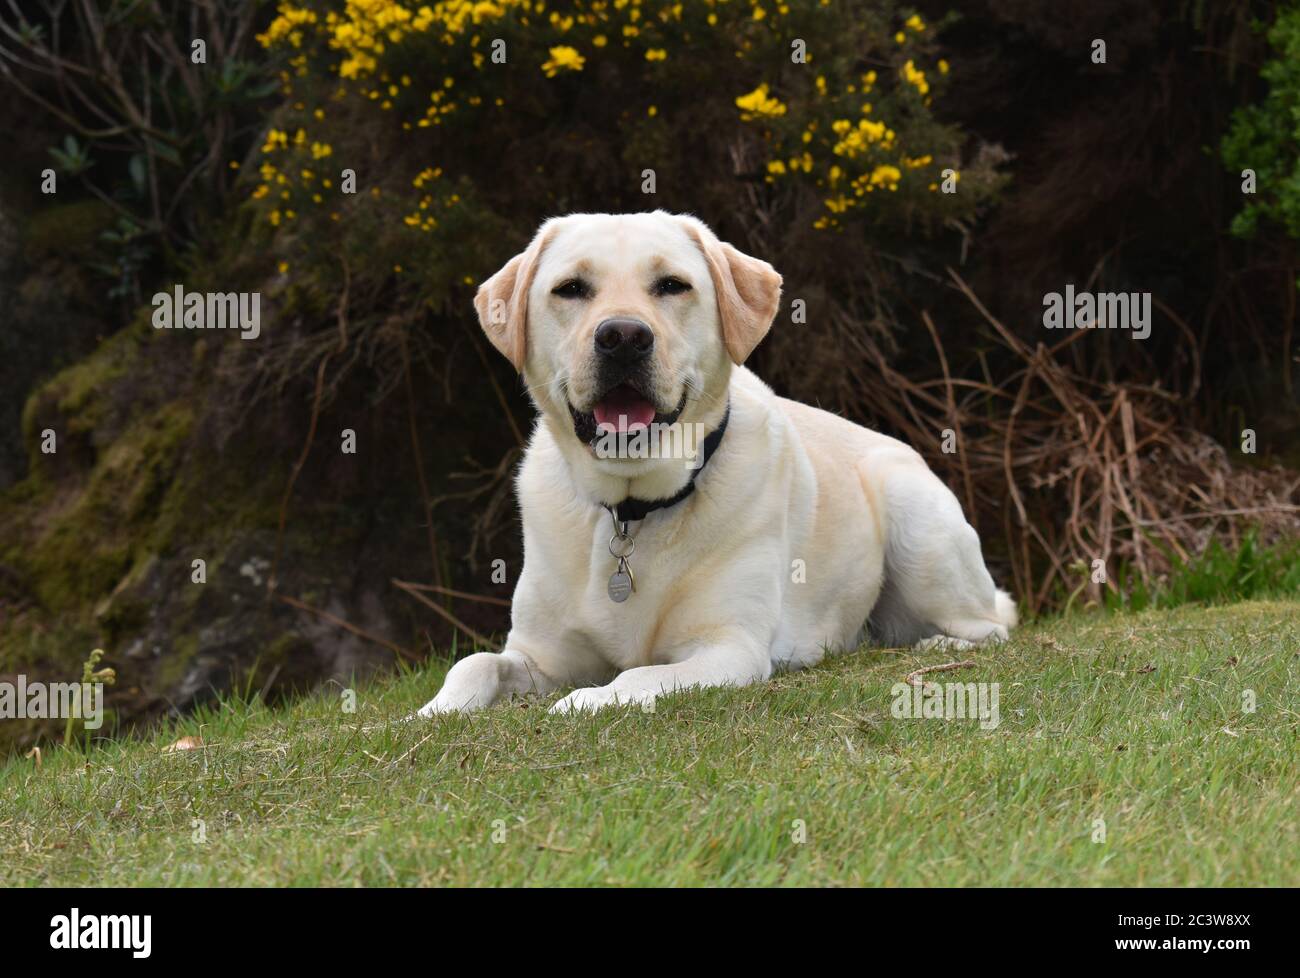 Golden labrador lying down on grass and looking at camera. No people. Stock Photo